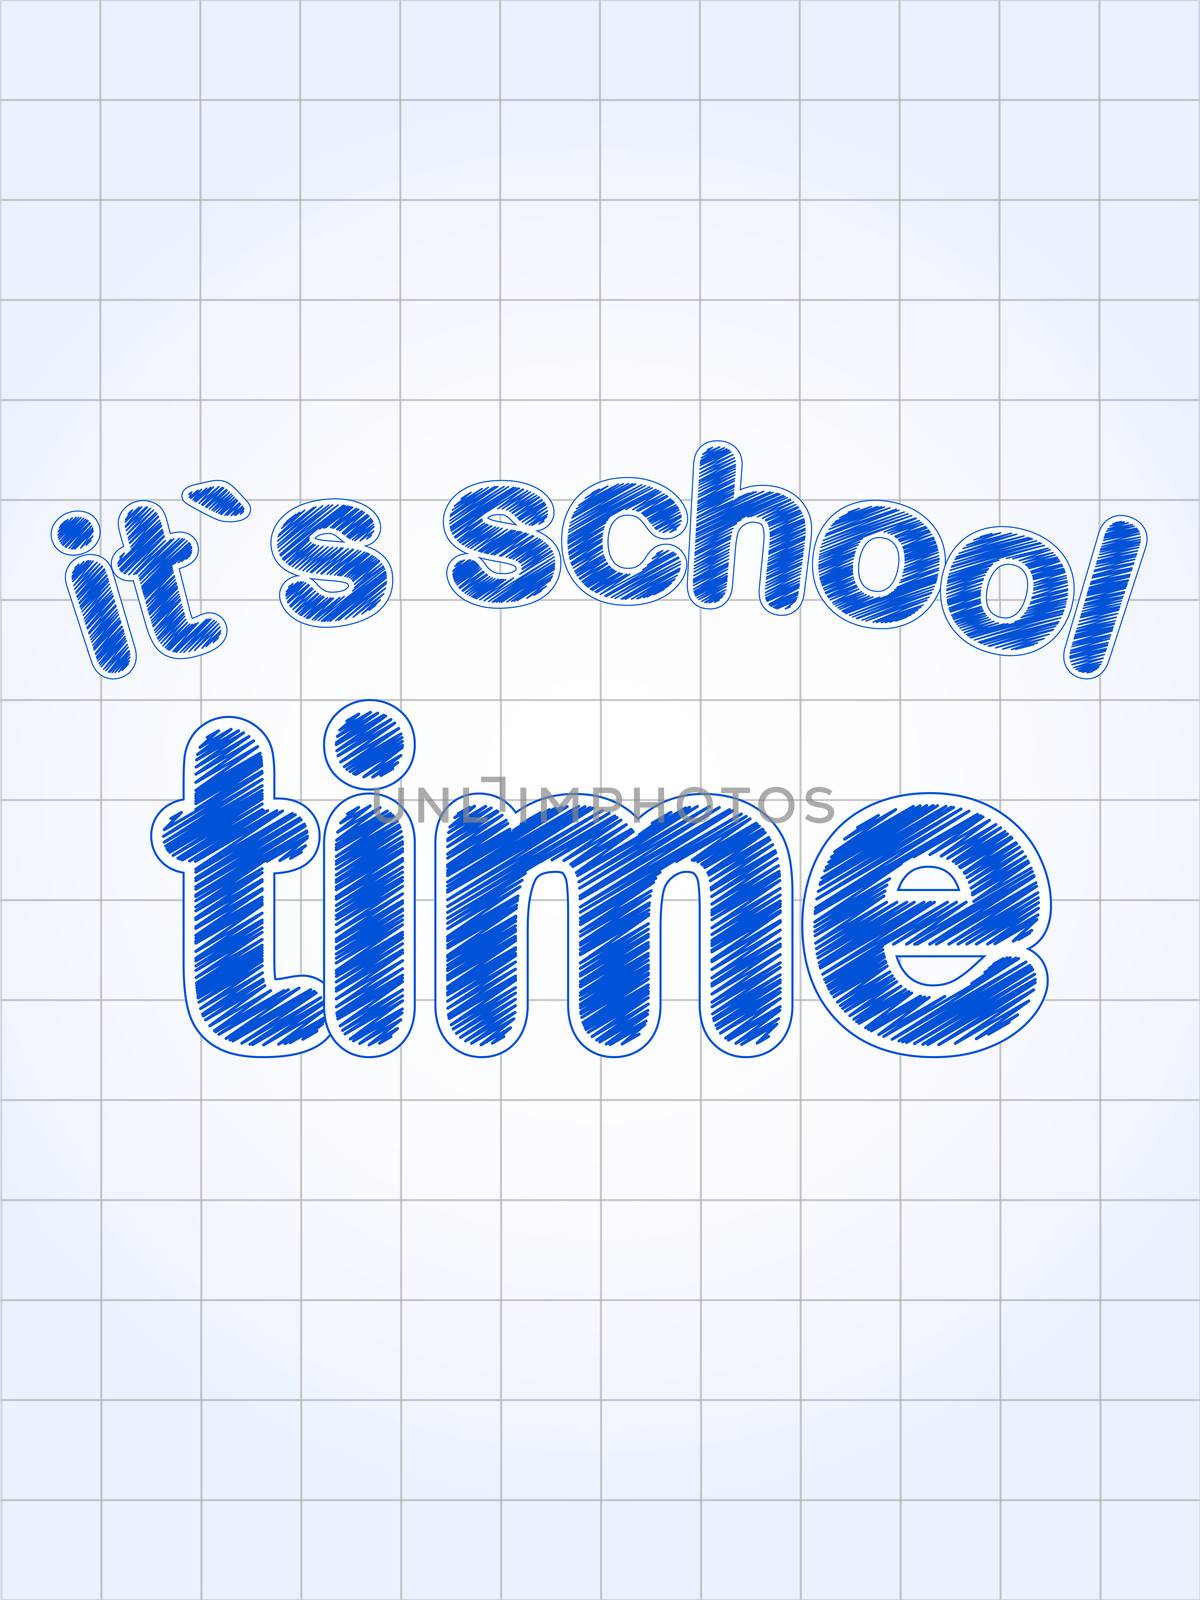 it's school time in blue over squared sheet by marinini